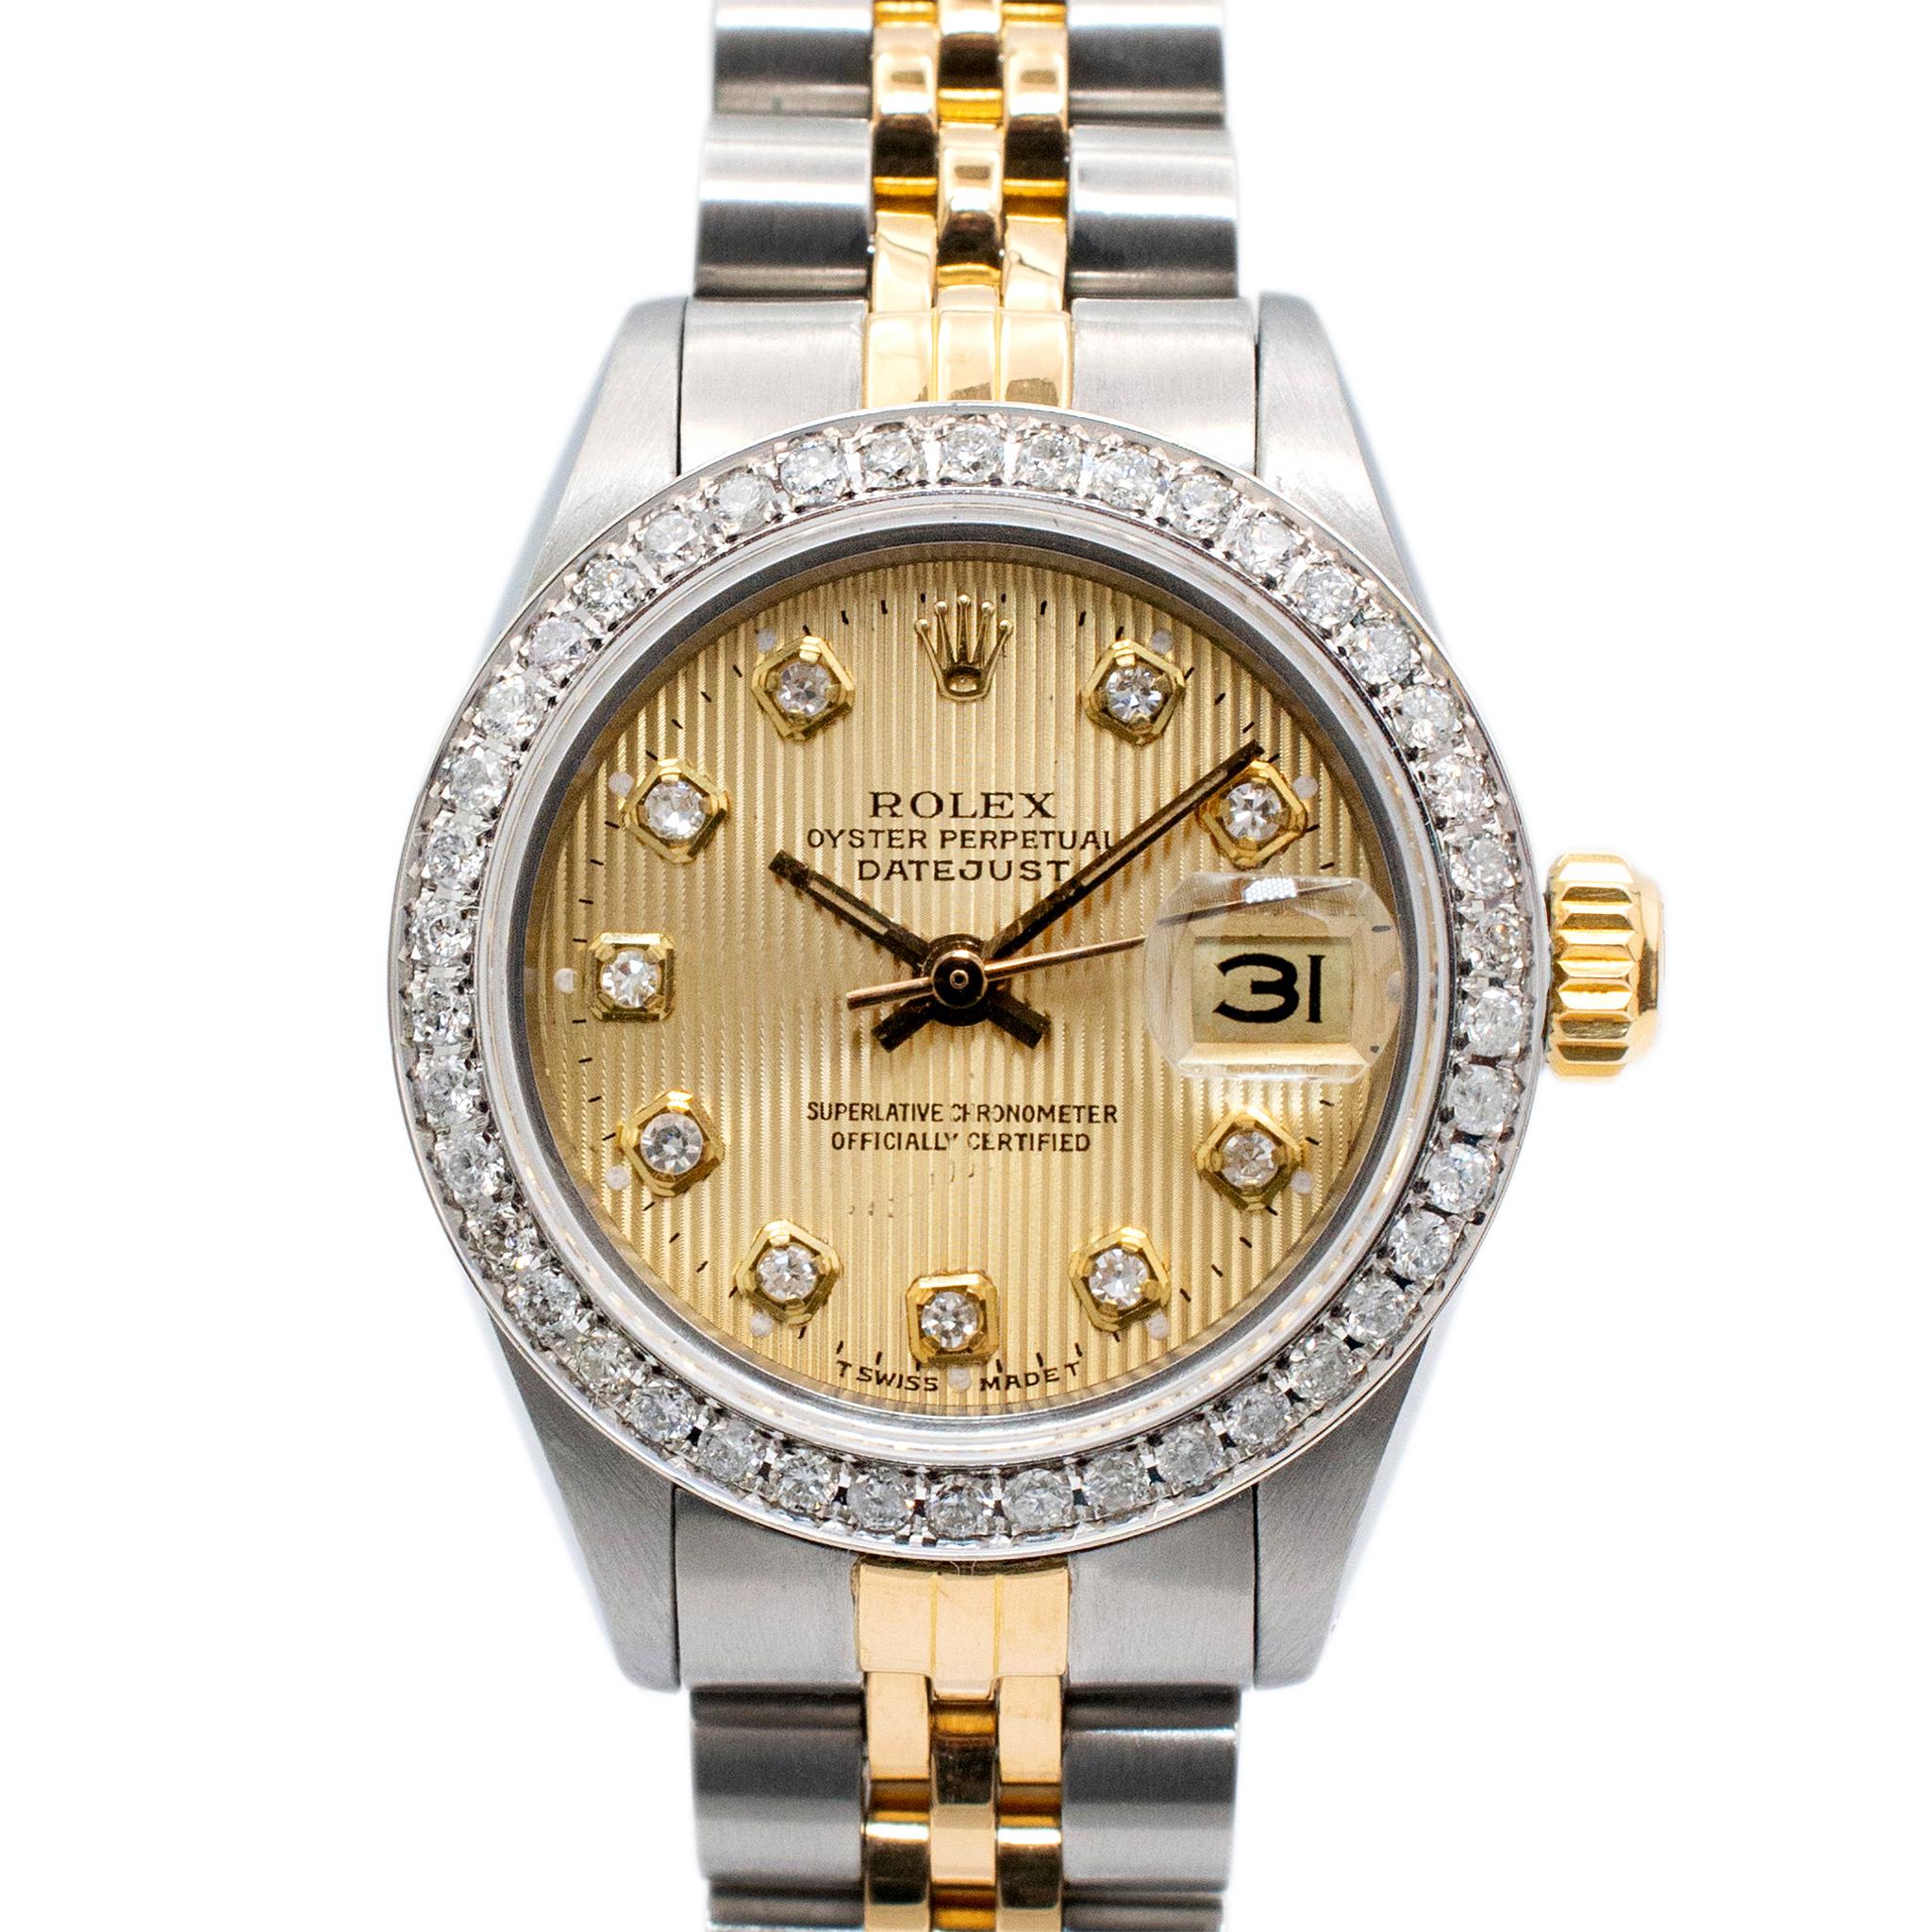 Gender: Ladies

Metal Type: 18K Yellow Gold and Stainless steel

Diameter: 26.00 mm

Weight: 52.00 grams

One ladies 18K yellow gold and stainless steel, diamond ROLEX Swiss made watch. The metals were tested and determined to be 18K yellow gold and